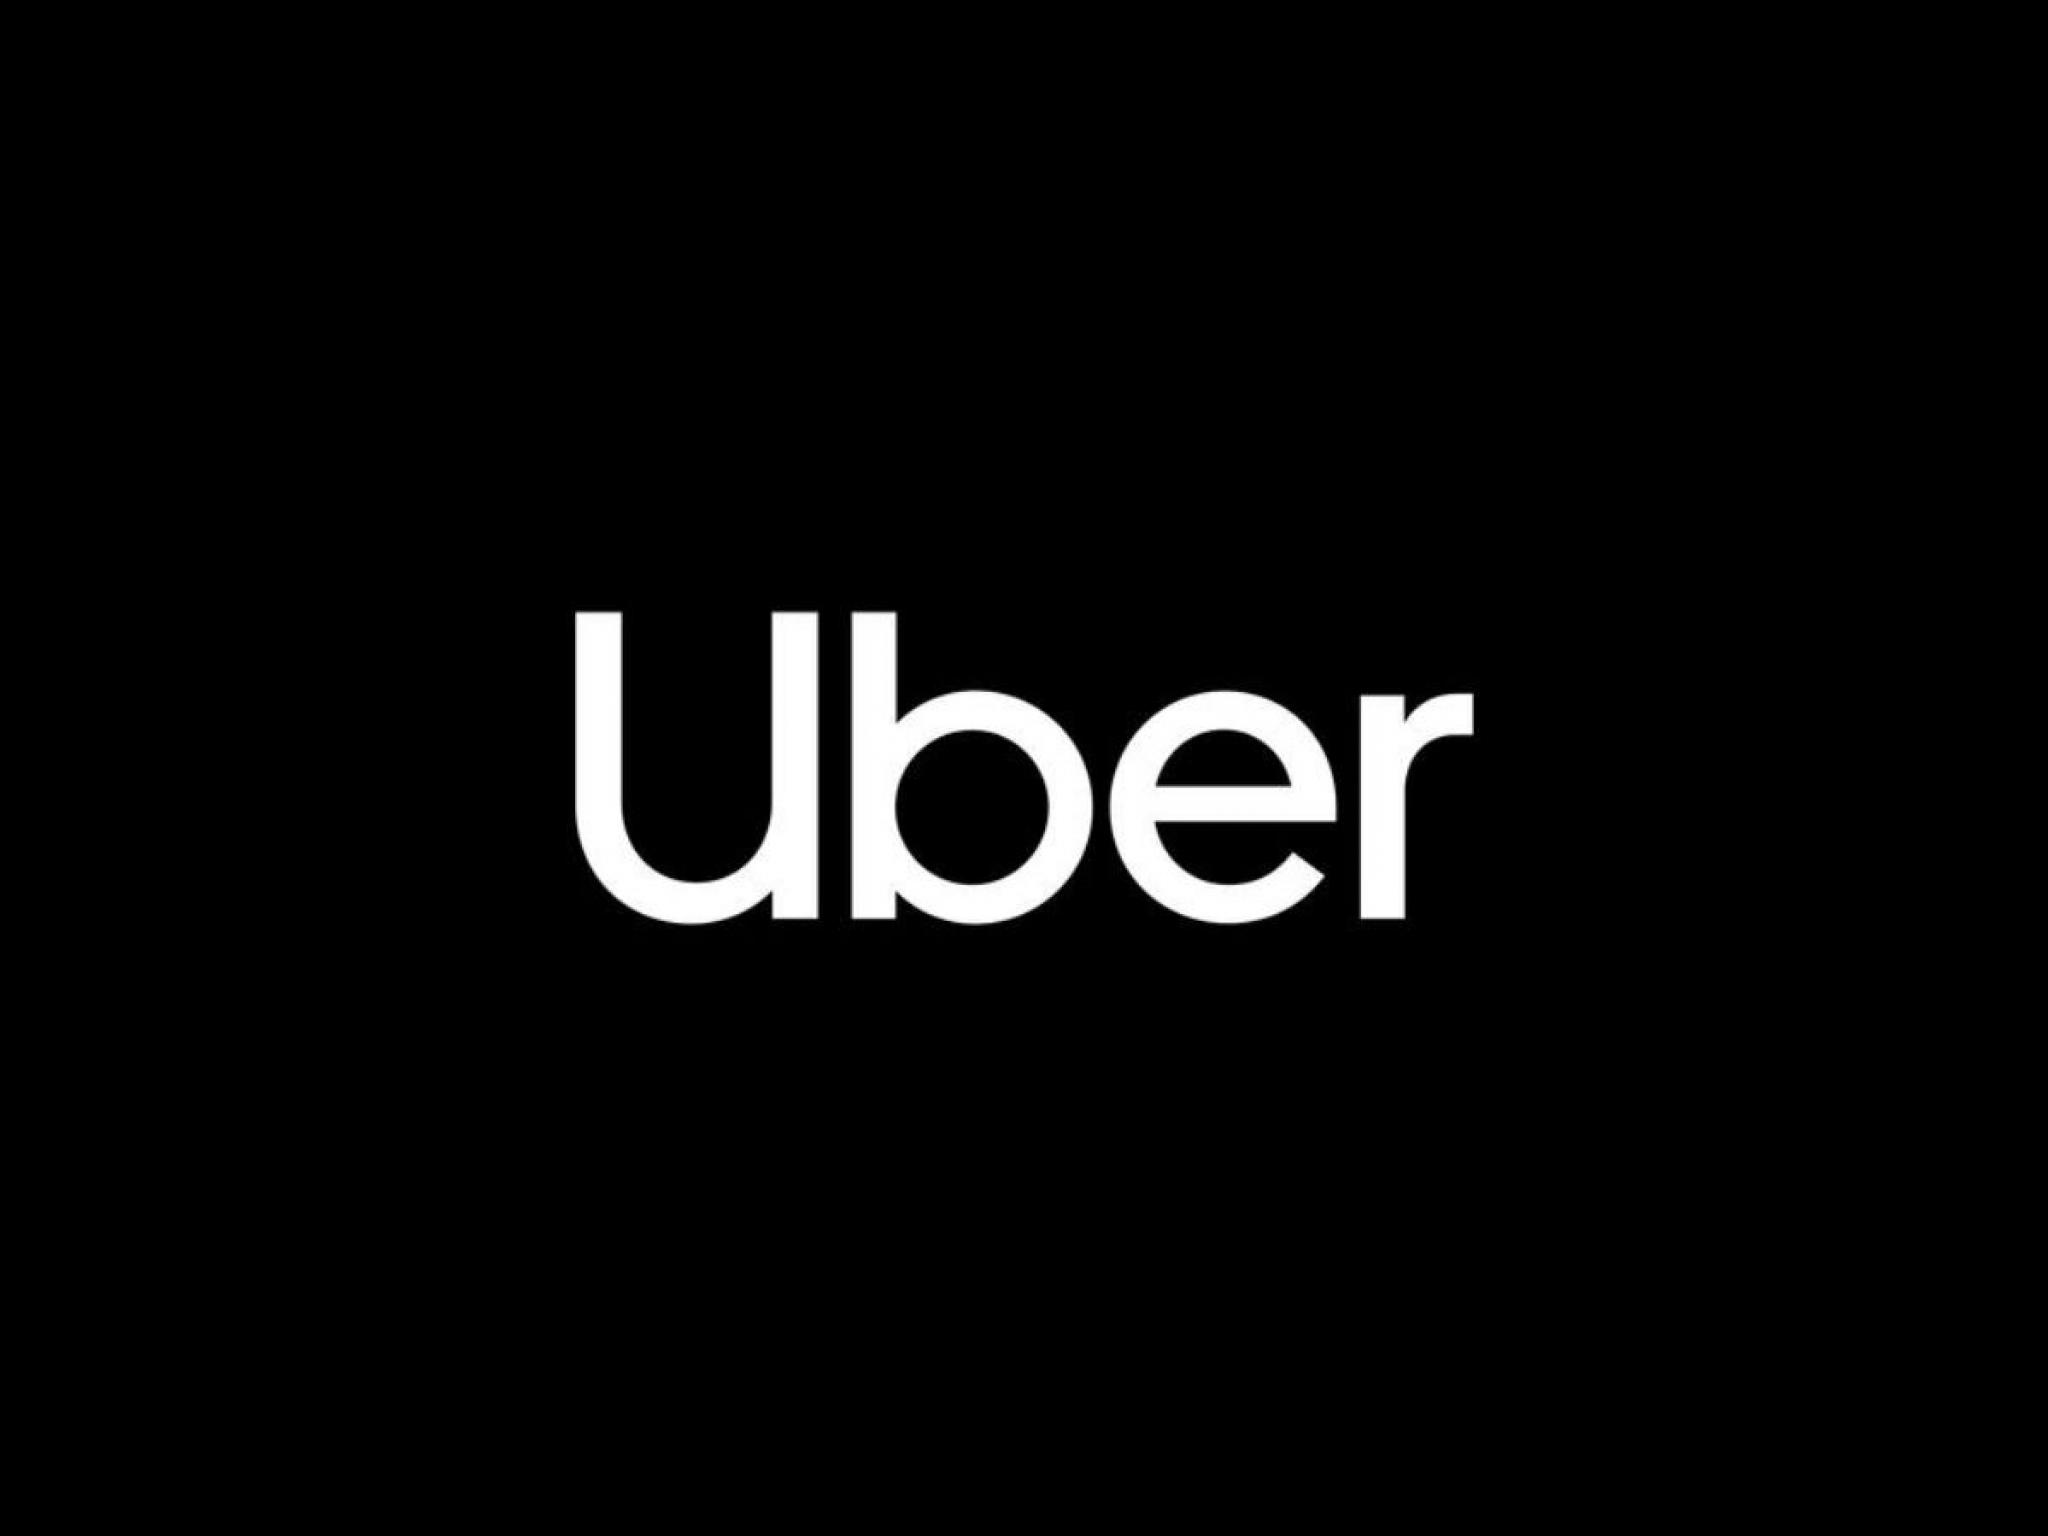  uber-to-rally-around-15-here-are-10-top-analyst-forecasts-for-tuesday 